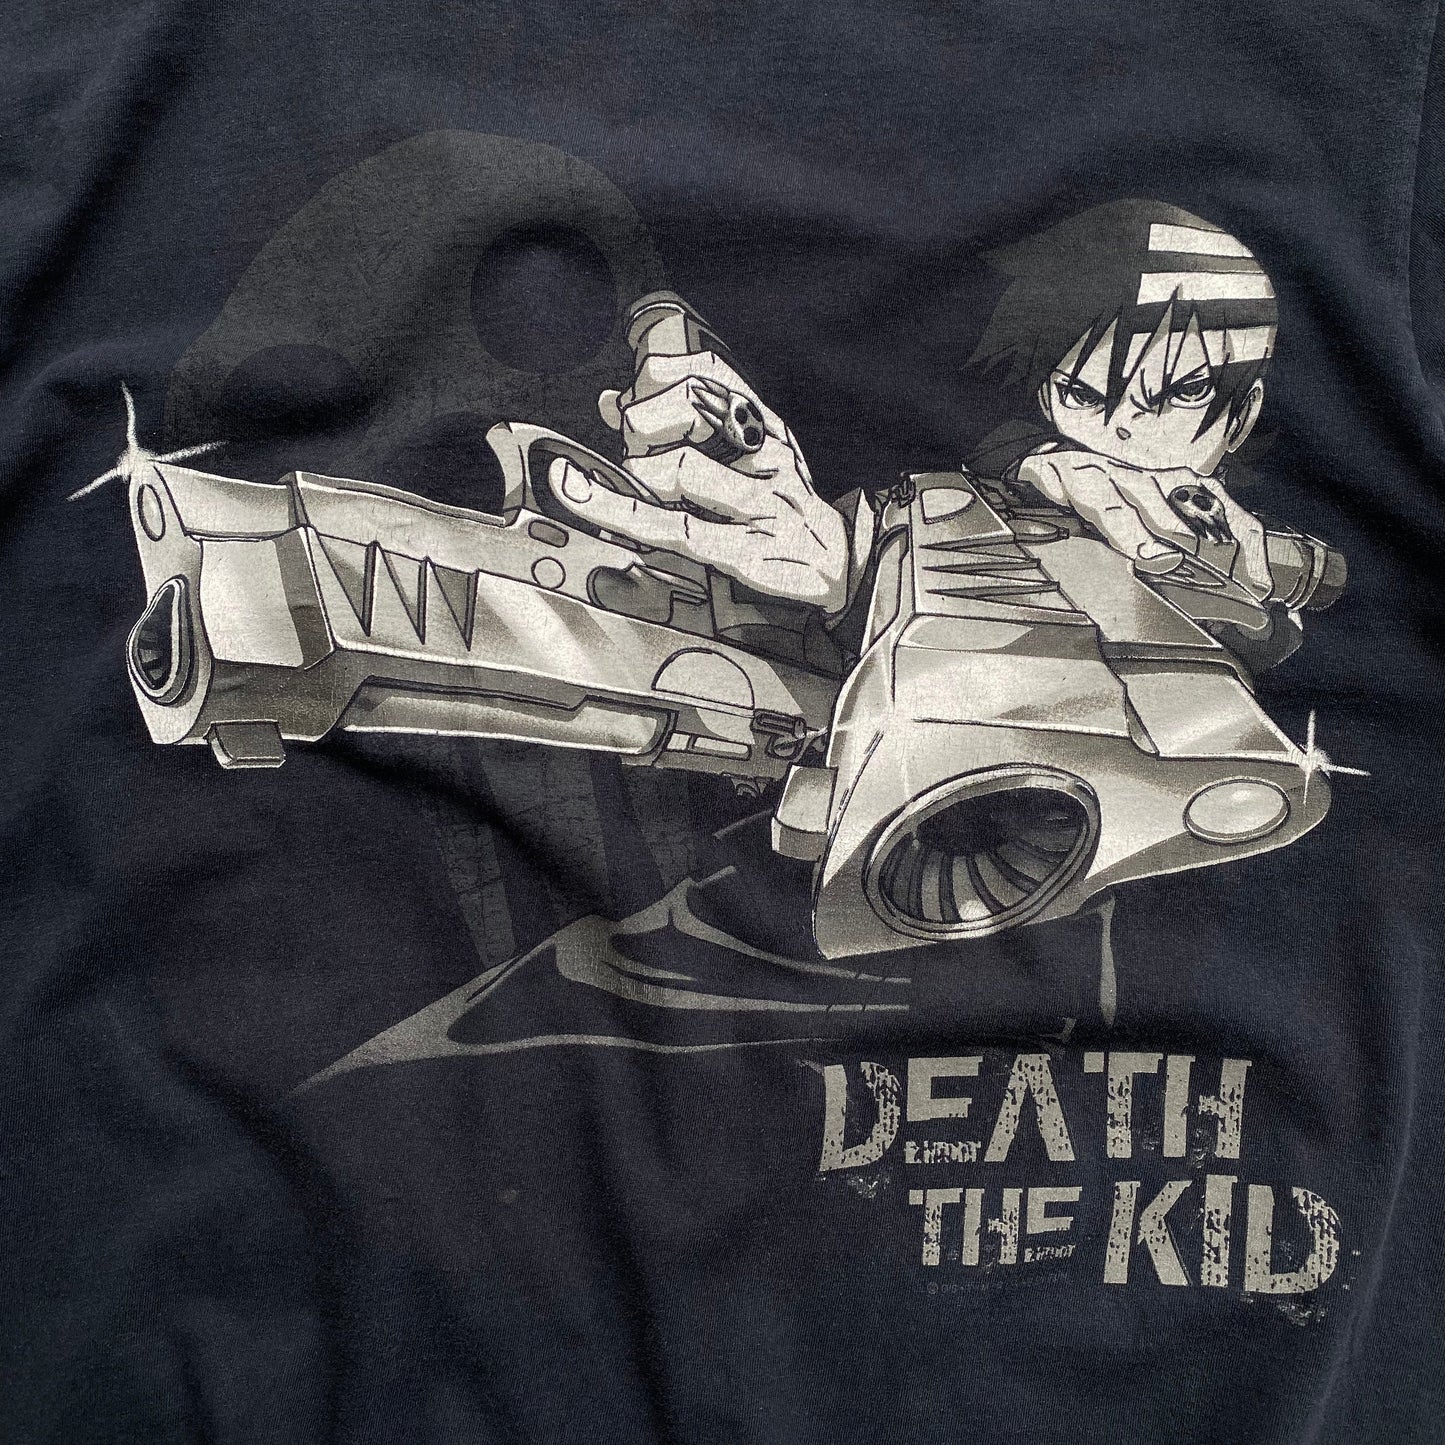 00's SOUL EATER "DEATH THE KID" T-SHIRT